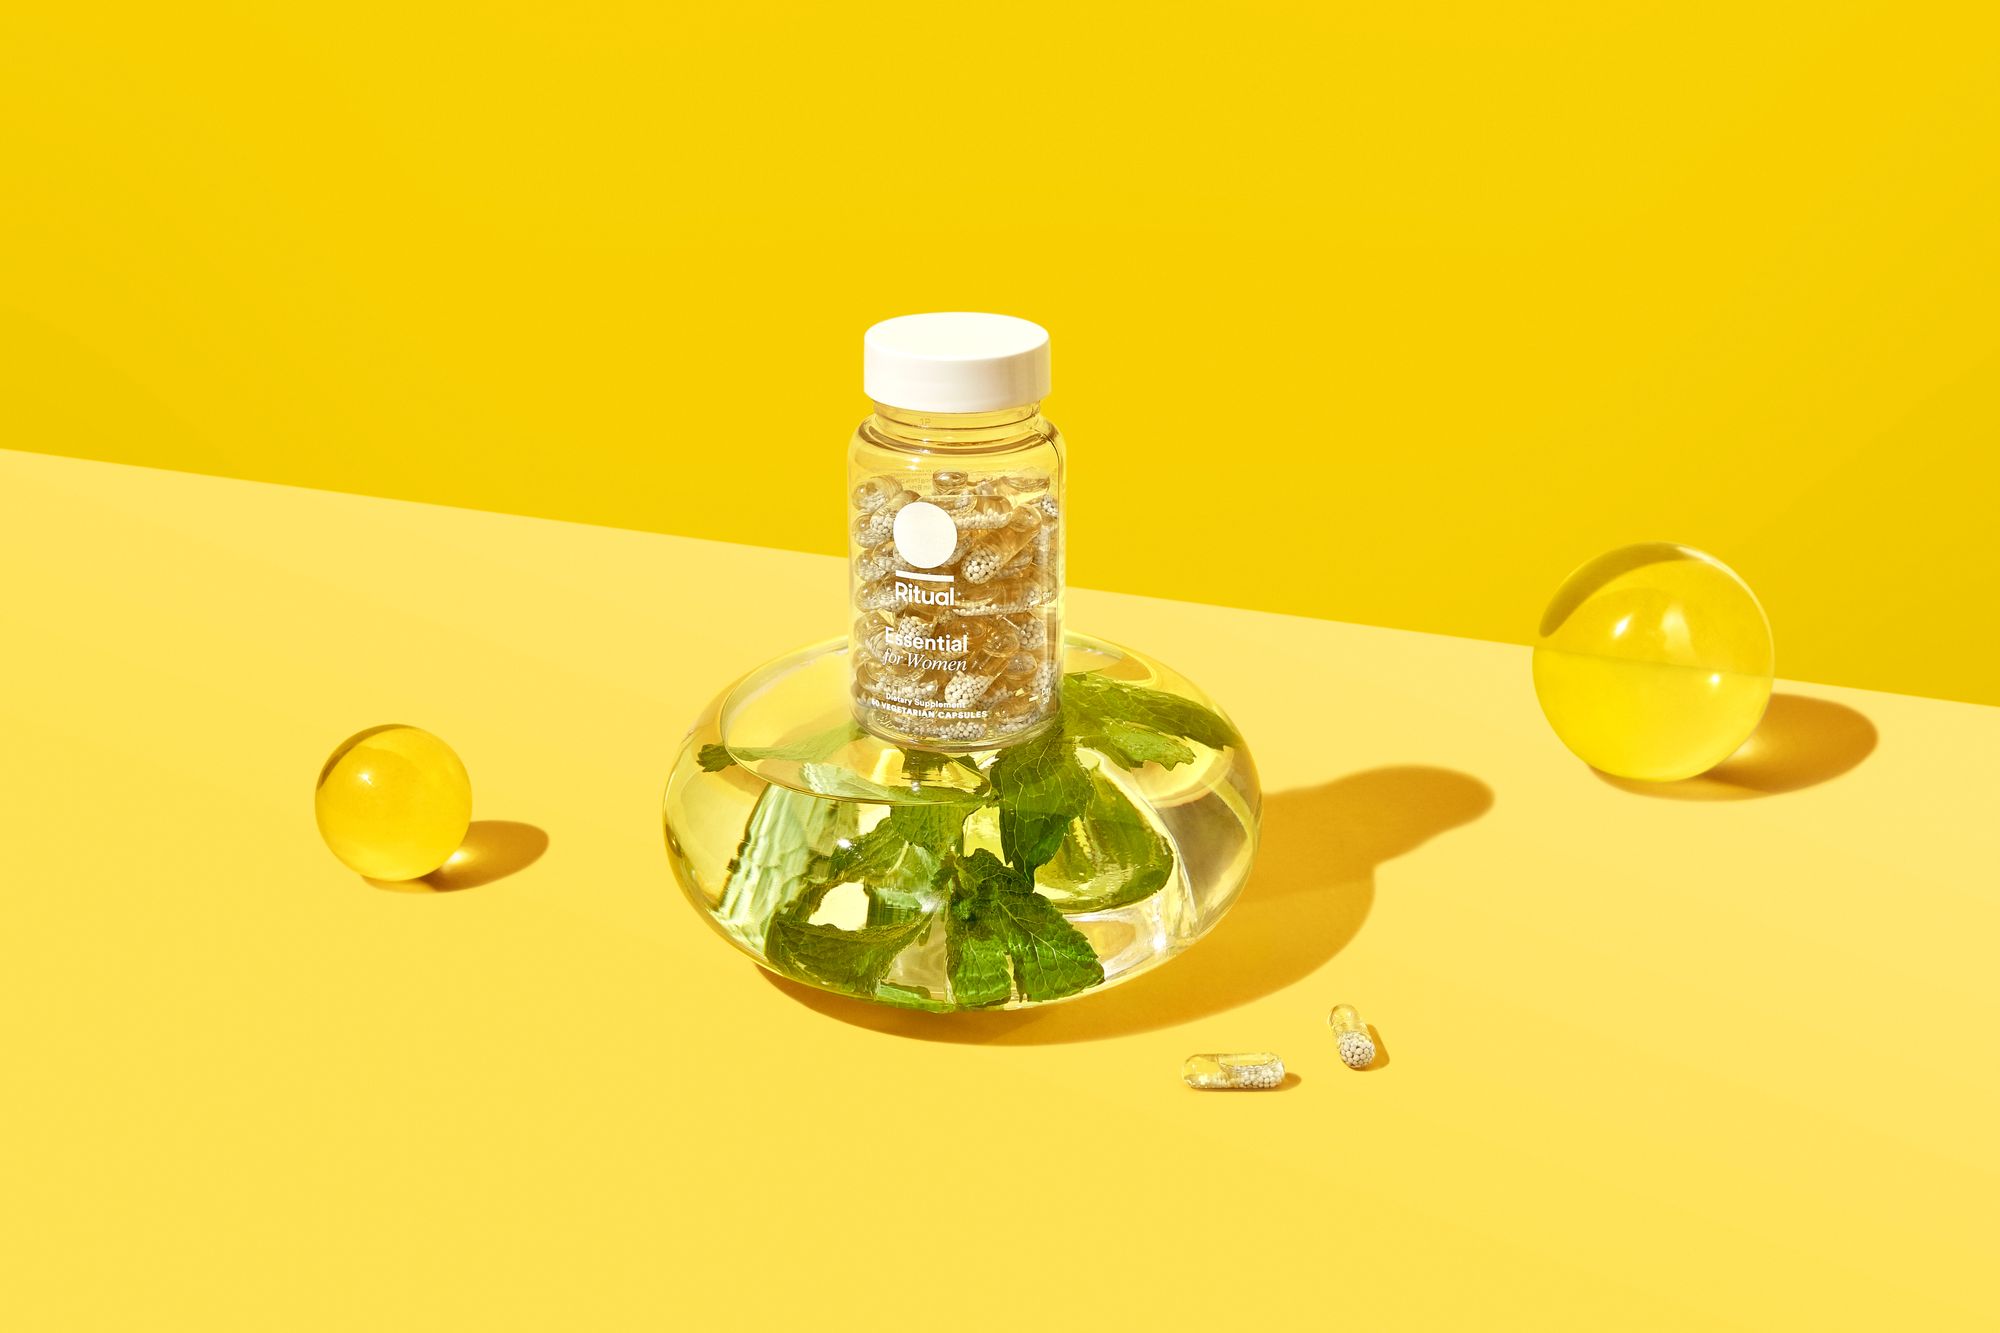 Vitamin bottle from the brand Ritual